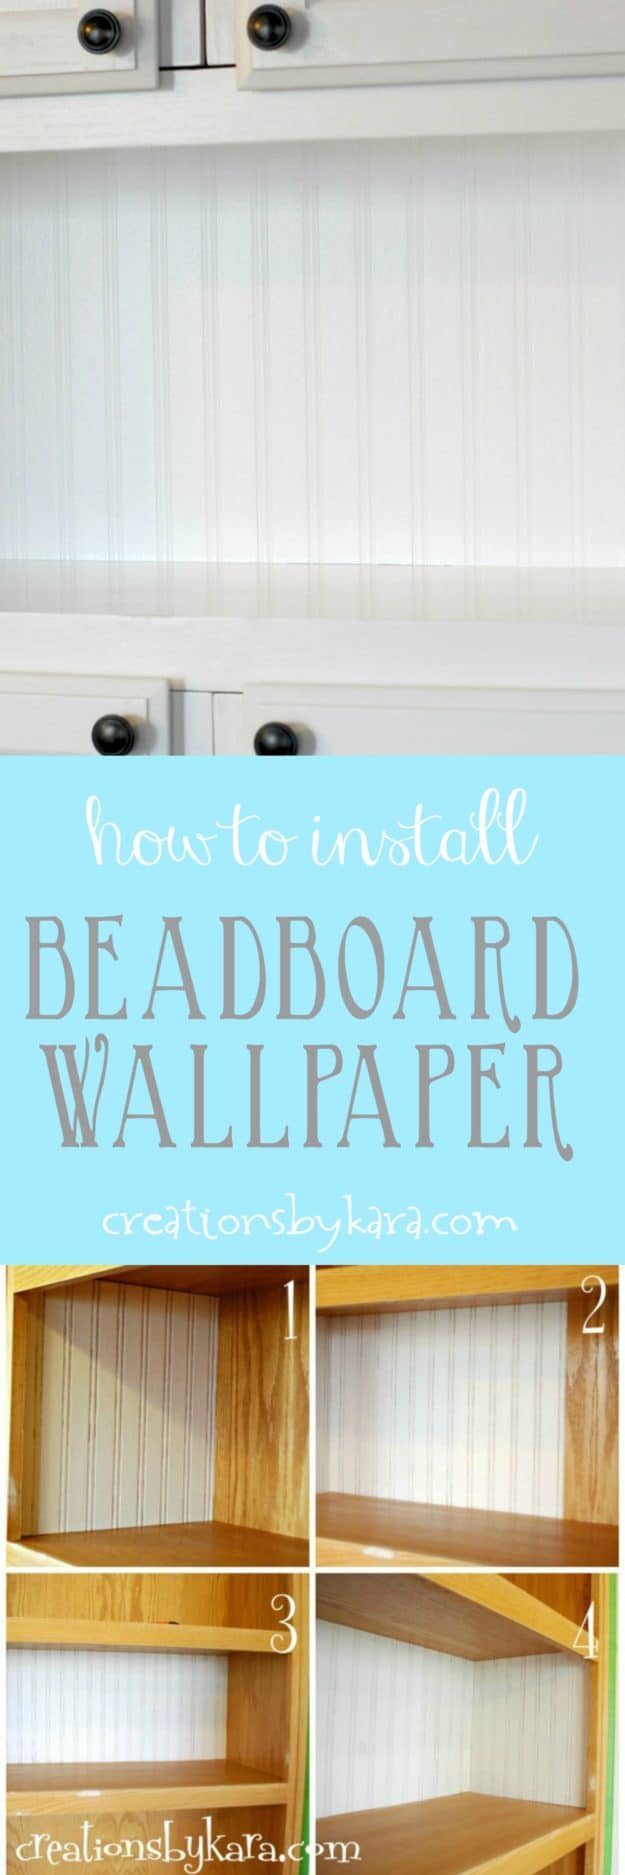 Learn how to install beadboard wallpaper with this step by step tutorial. An inexpensive DIY project with great results!